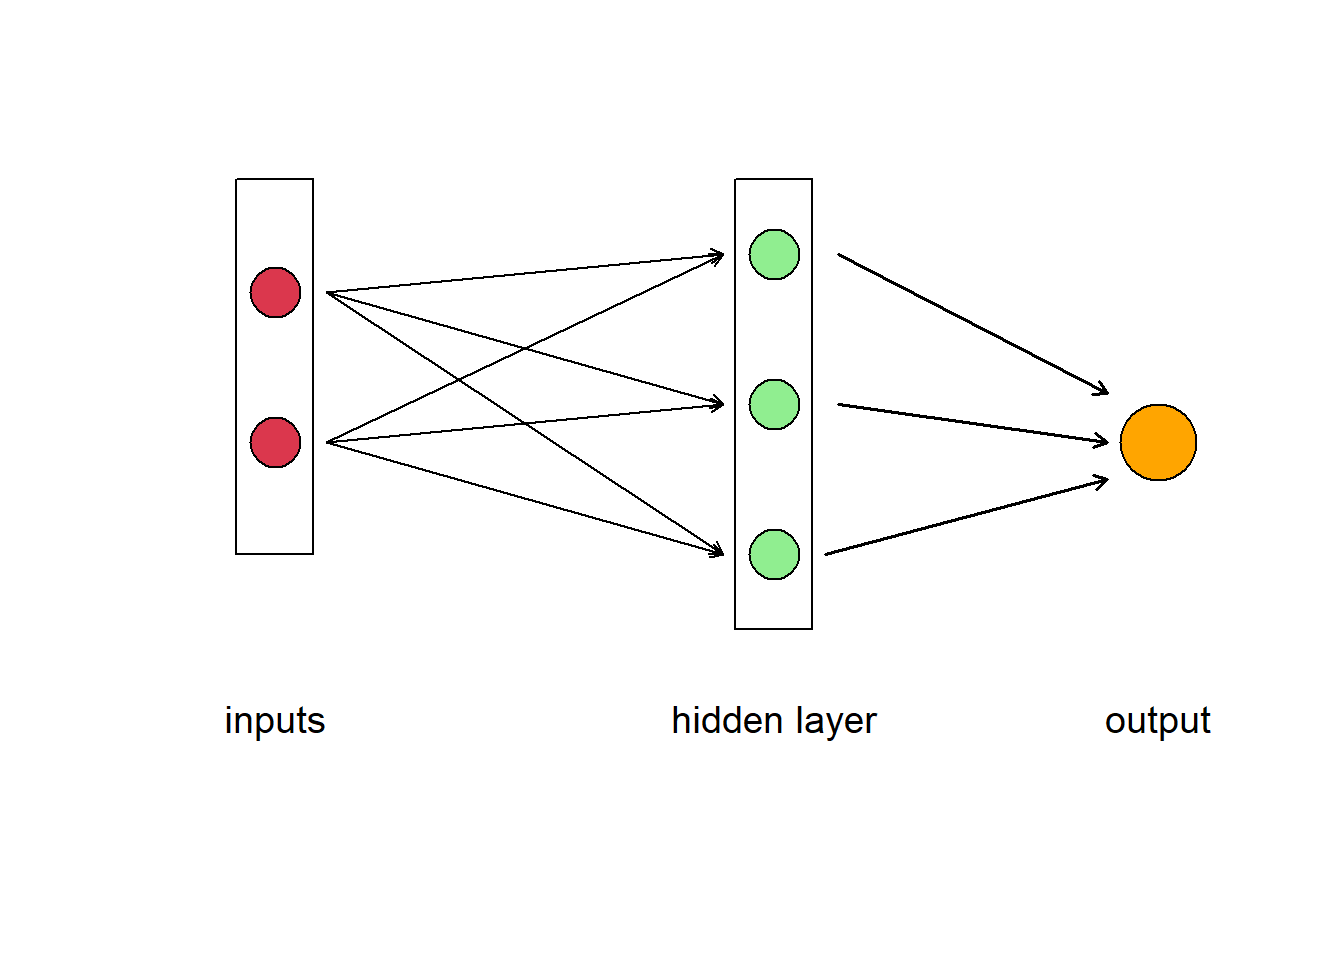 Artificial neural network showing connections between inputs to hidden layer to output